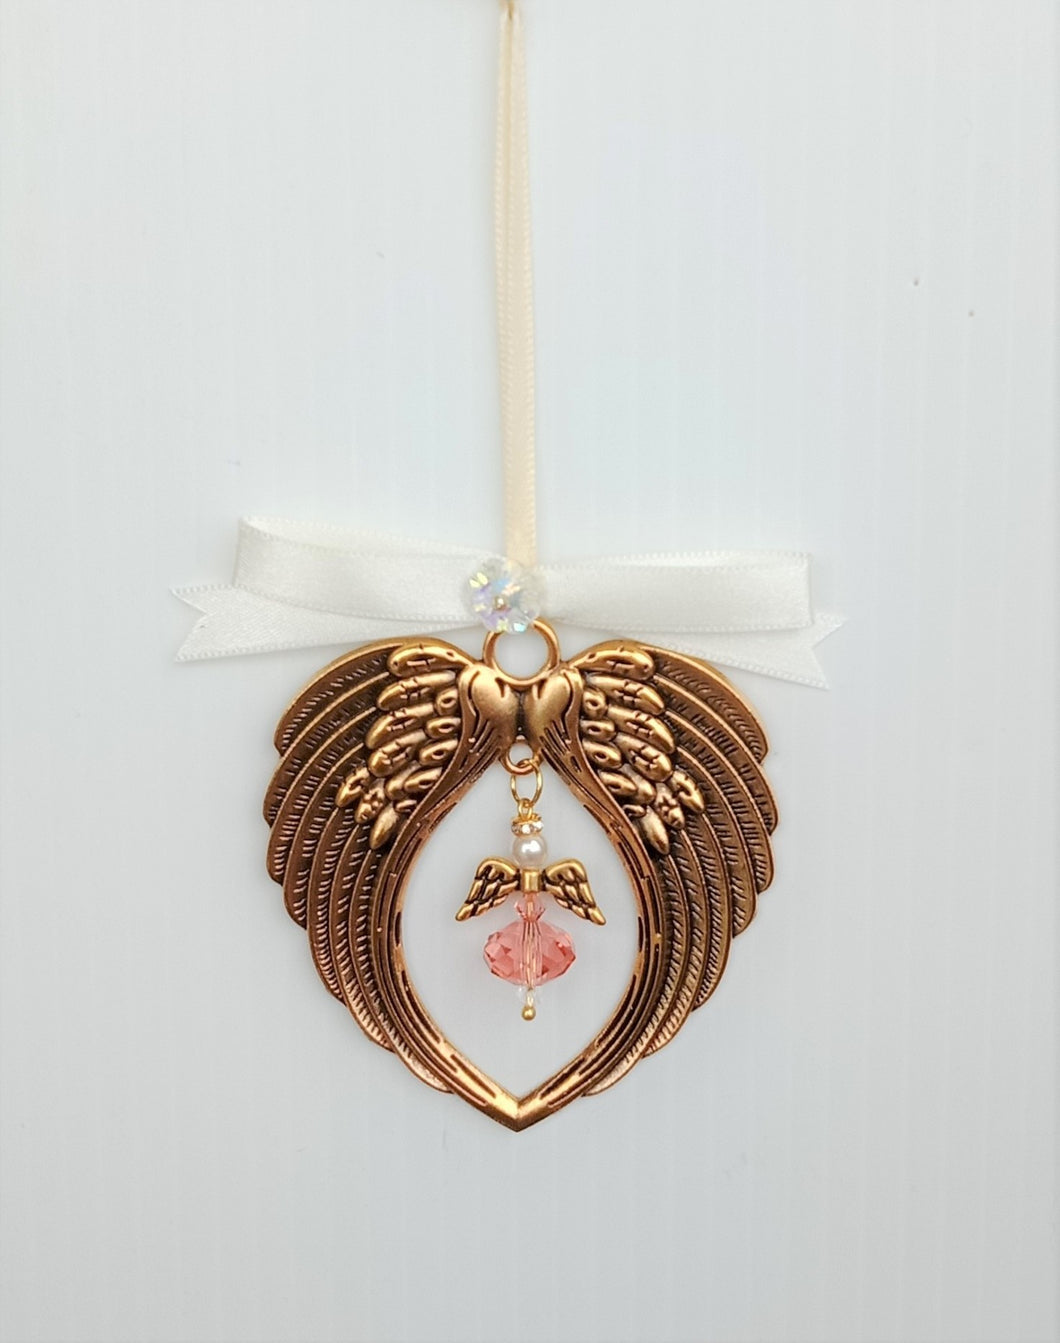 Angel Wings Decoration, gold metal wings with crystal sequin and Swarovski angel pendant